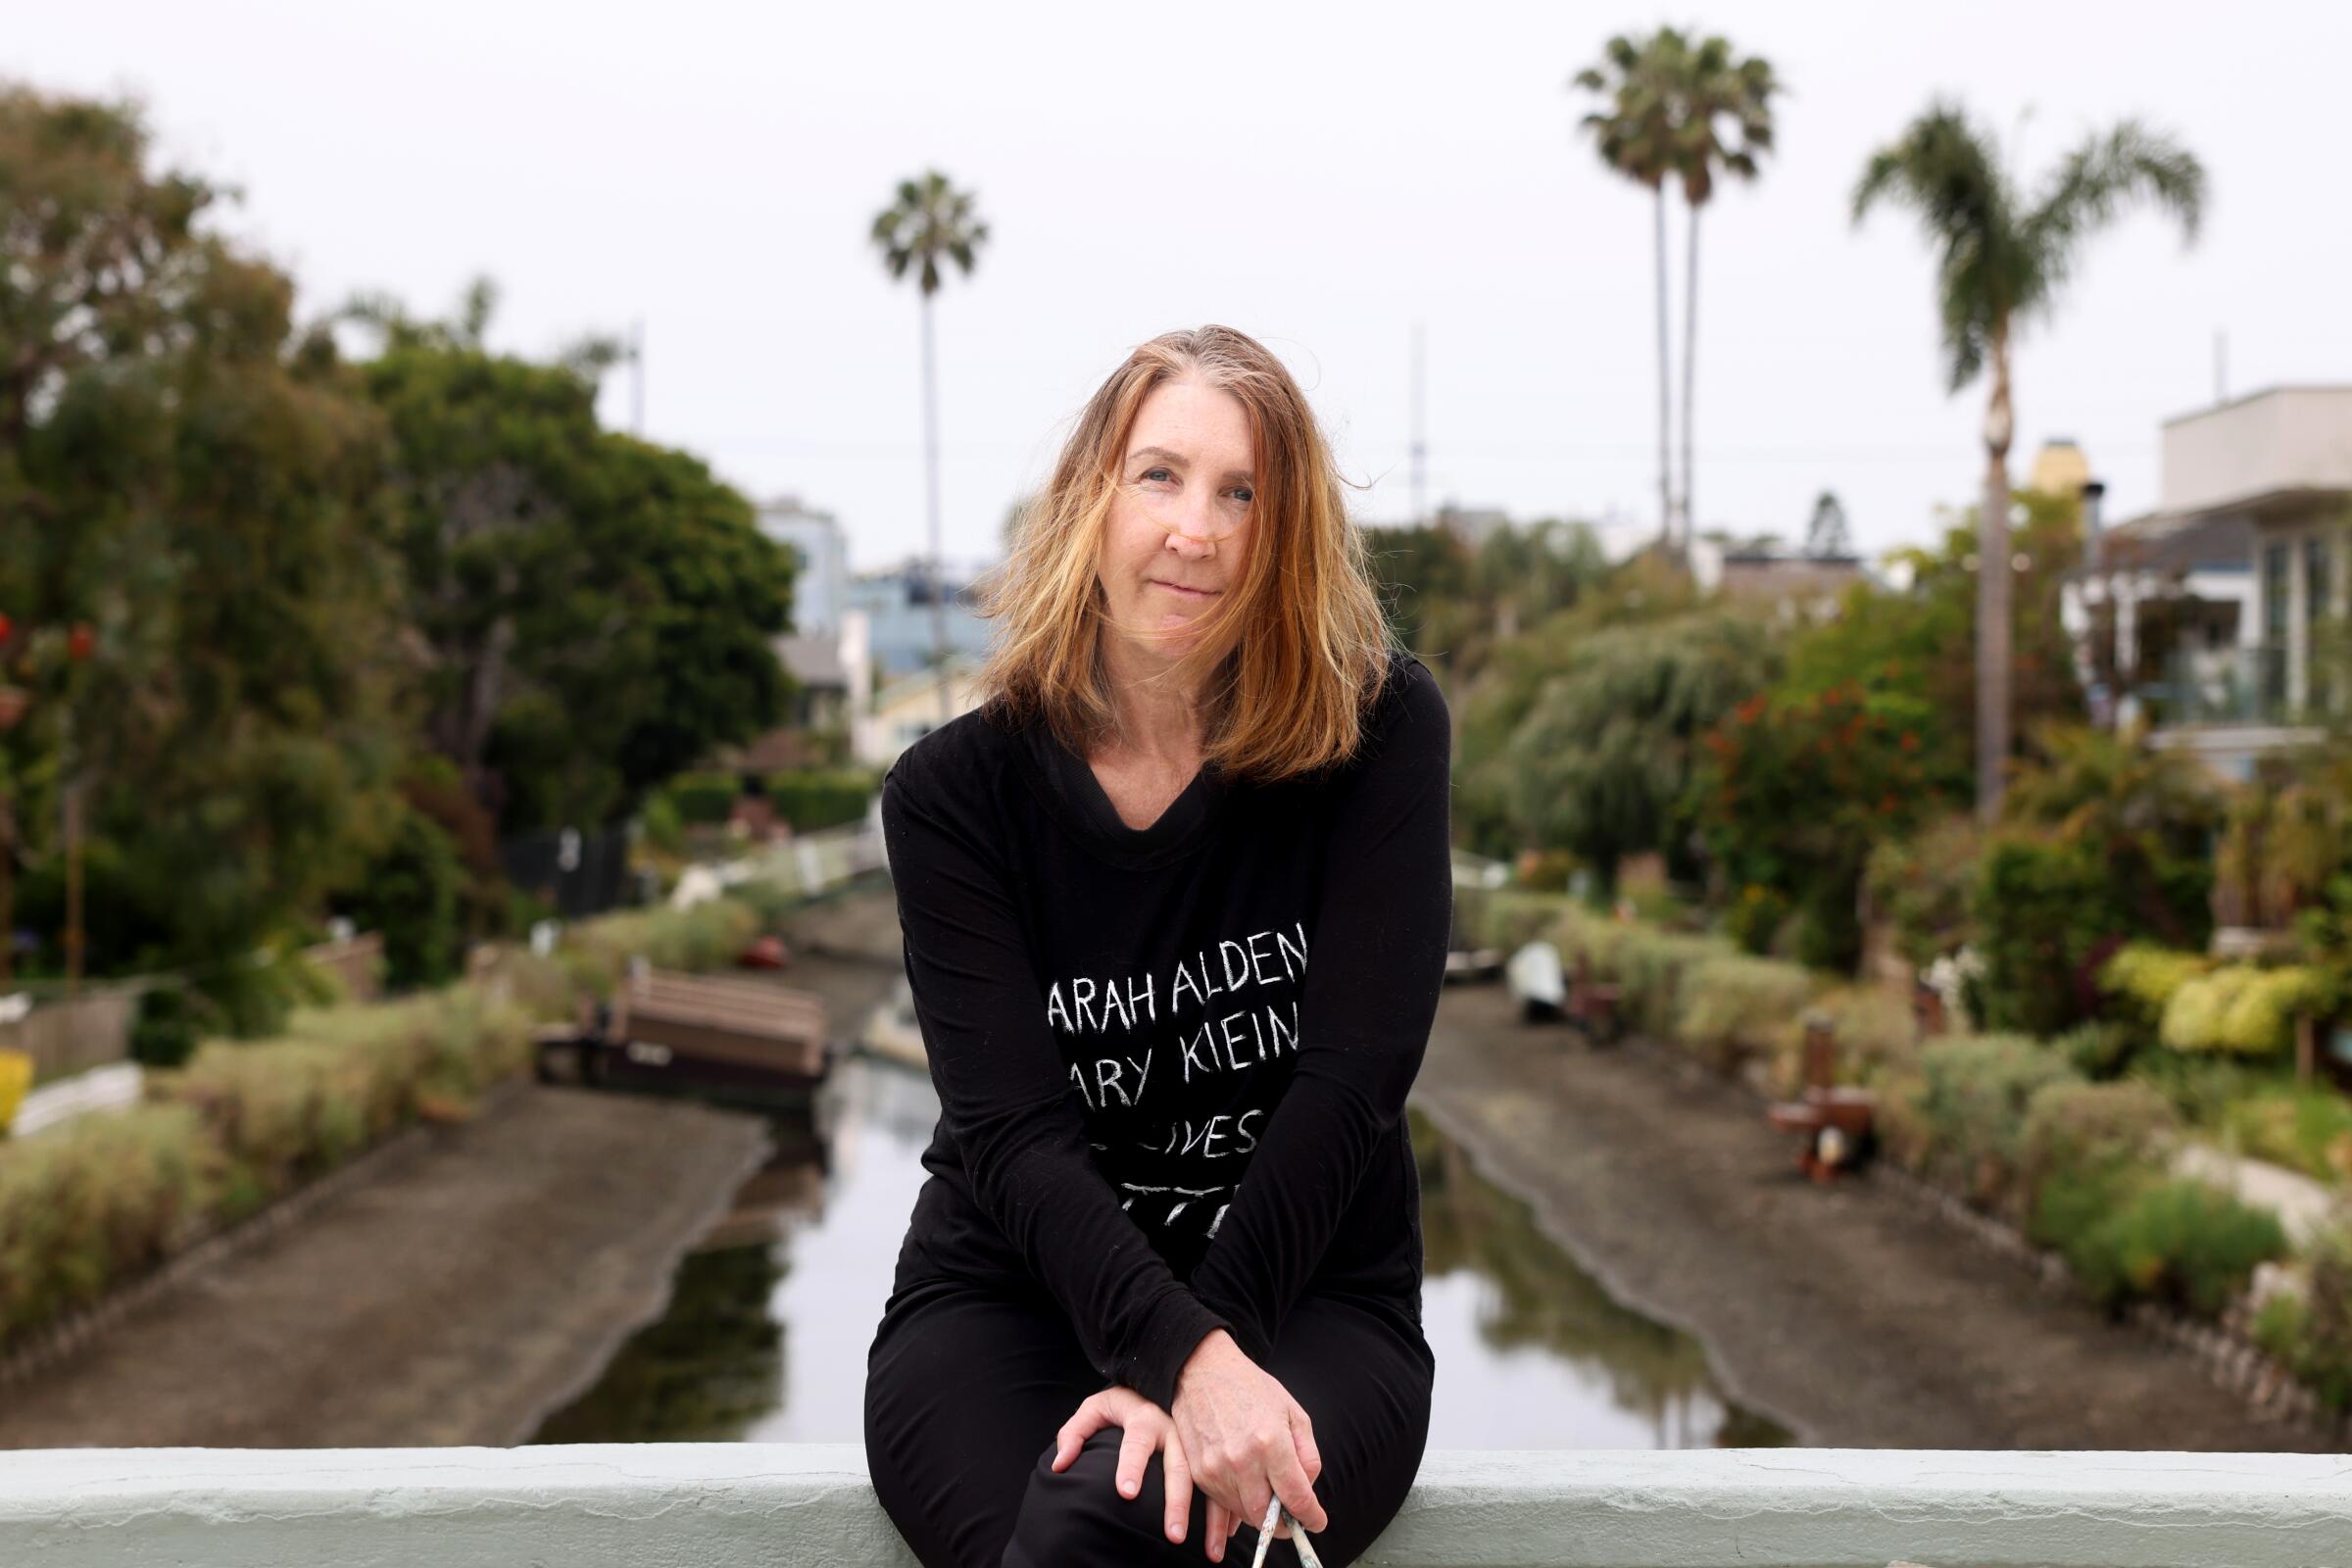 Venice resident Mary Klein sits atop a bridge over the Venice Canals where she was attacked in April.